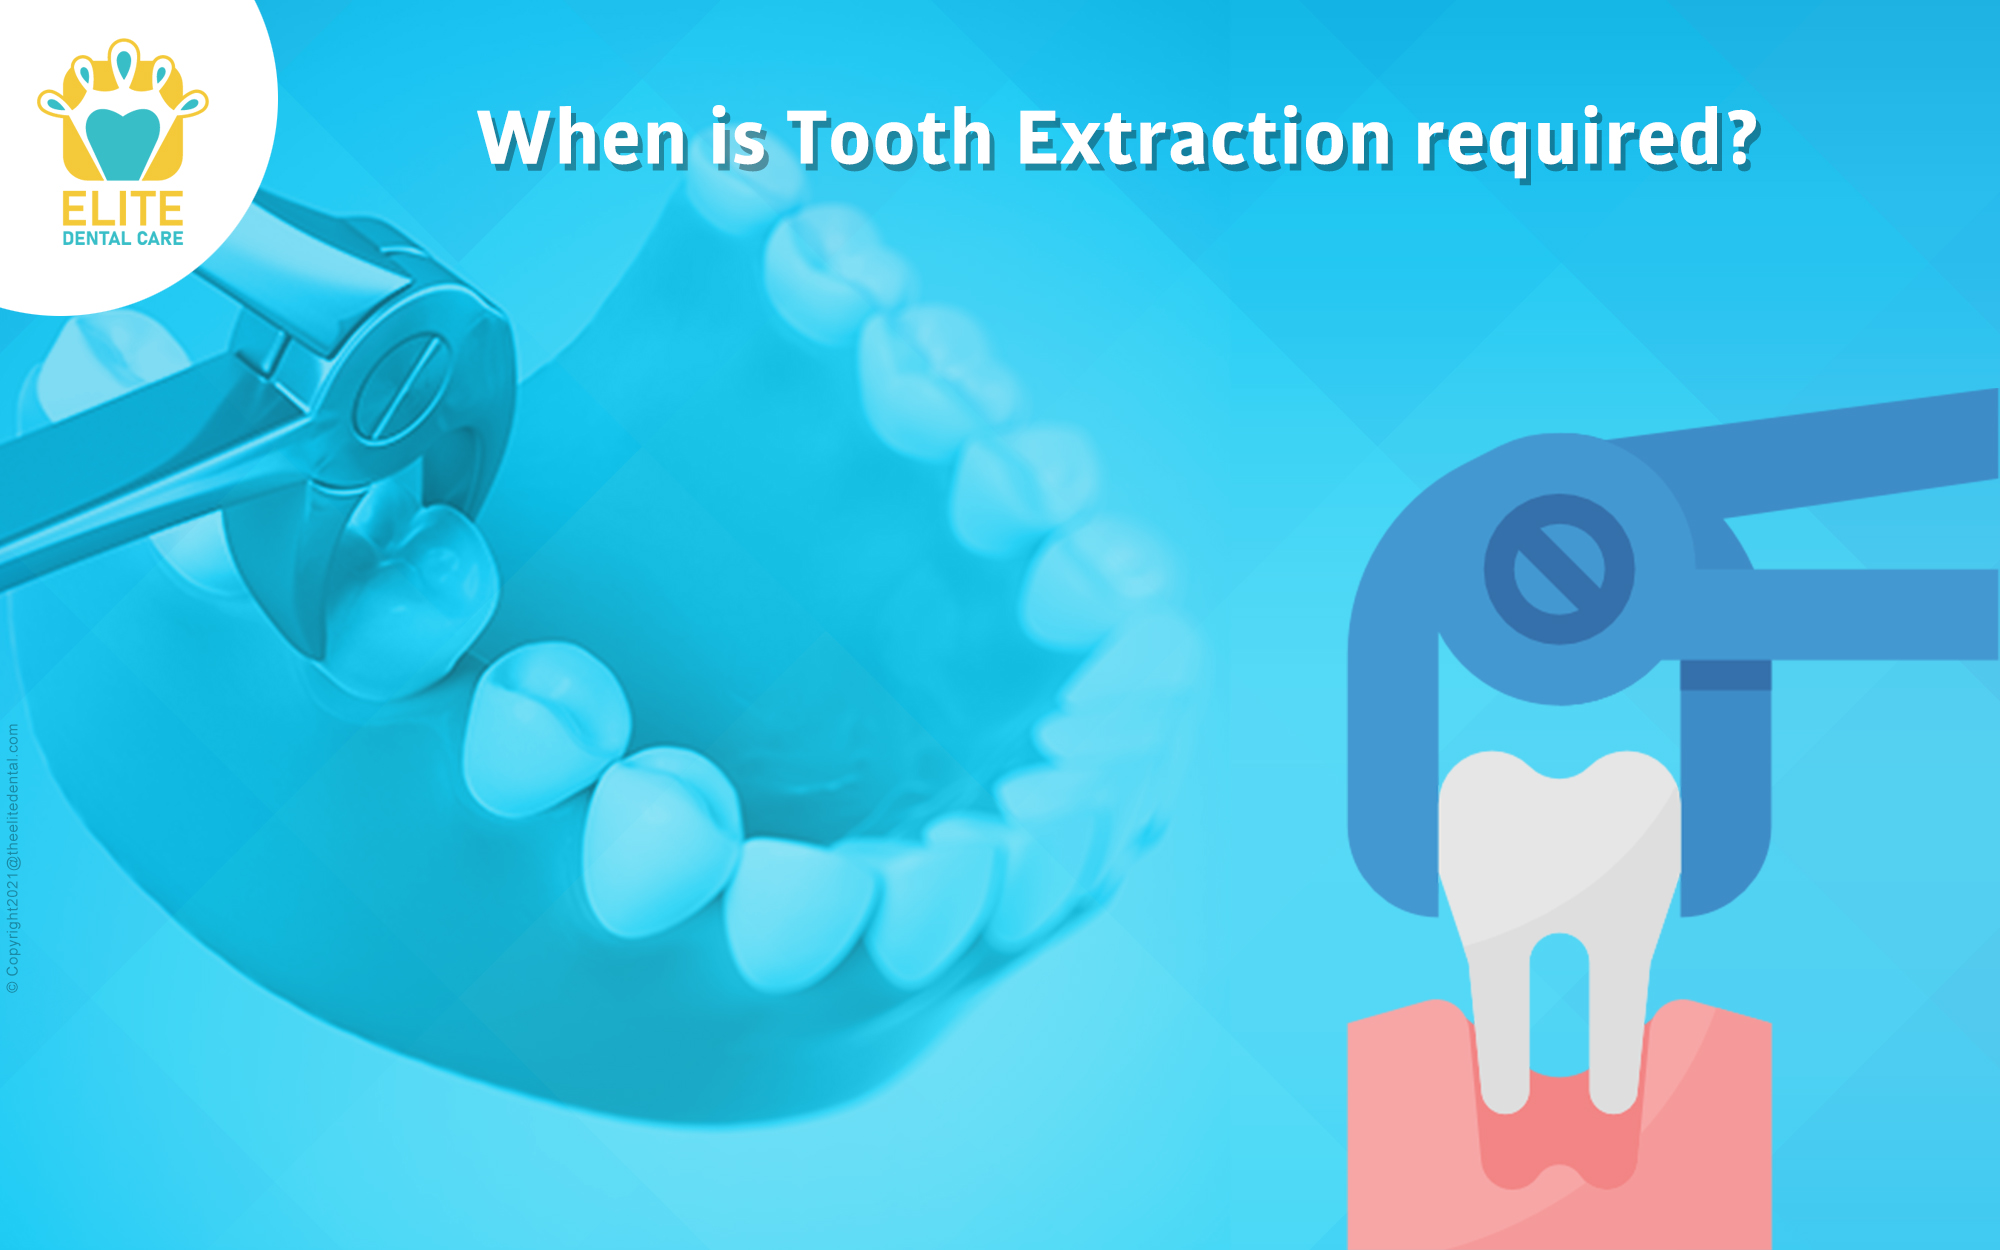 When is Tooth Extraction required?